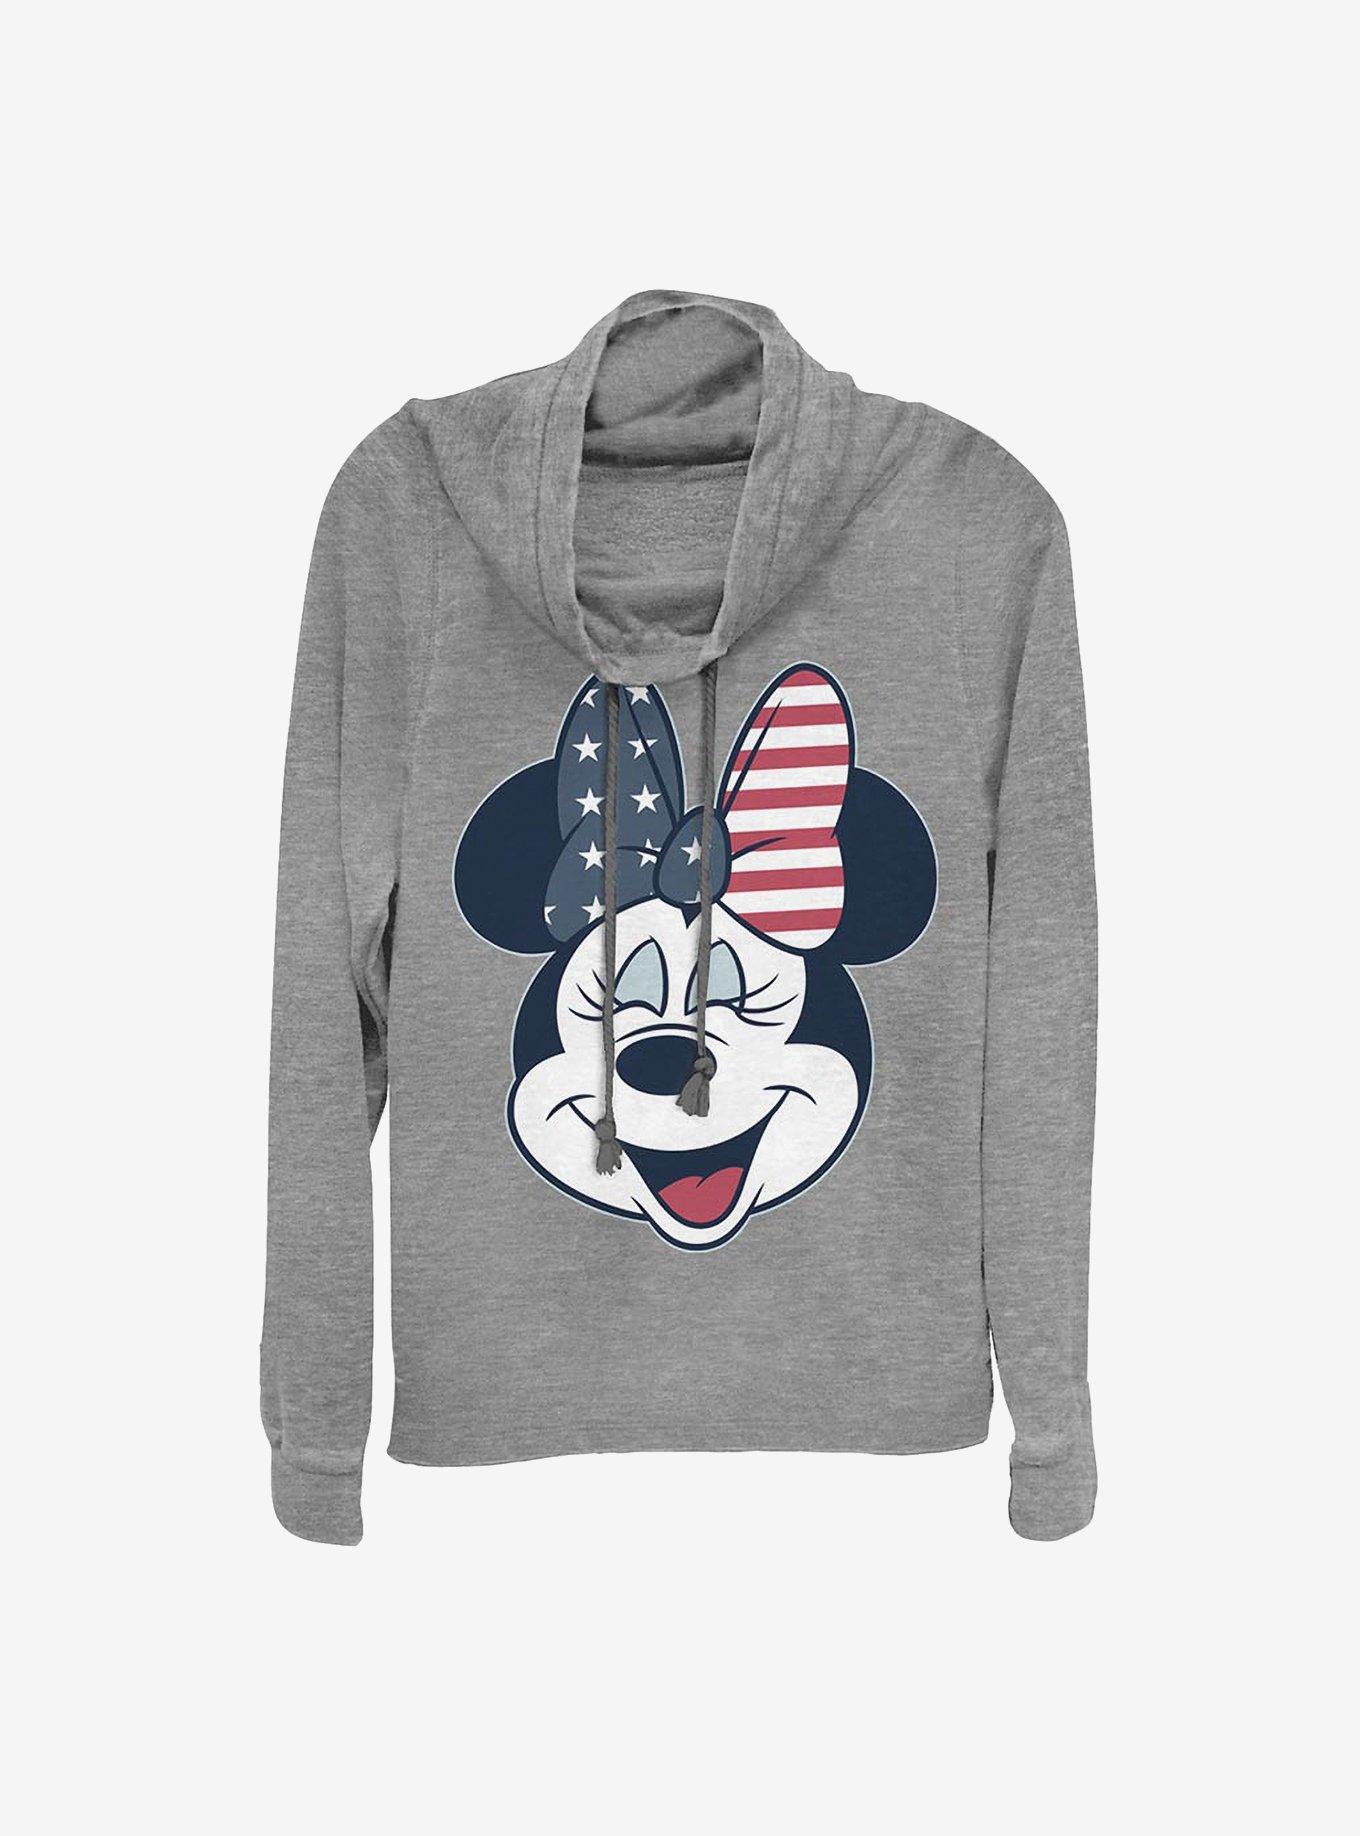 Disney Minnie Mouse America Bow Cowlneck Long-Sleeve Girls Top, GRAY HTR, hi-res